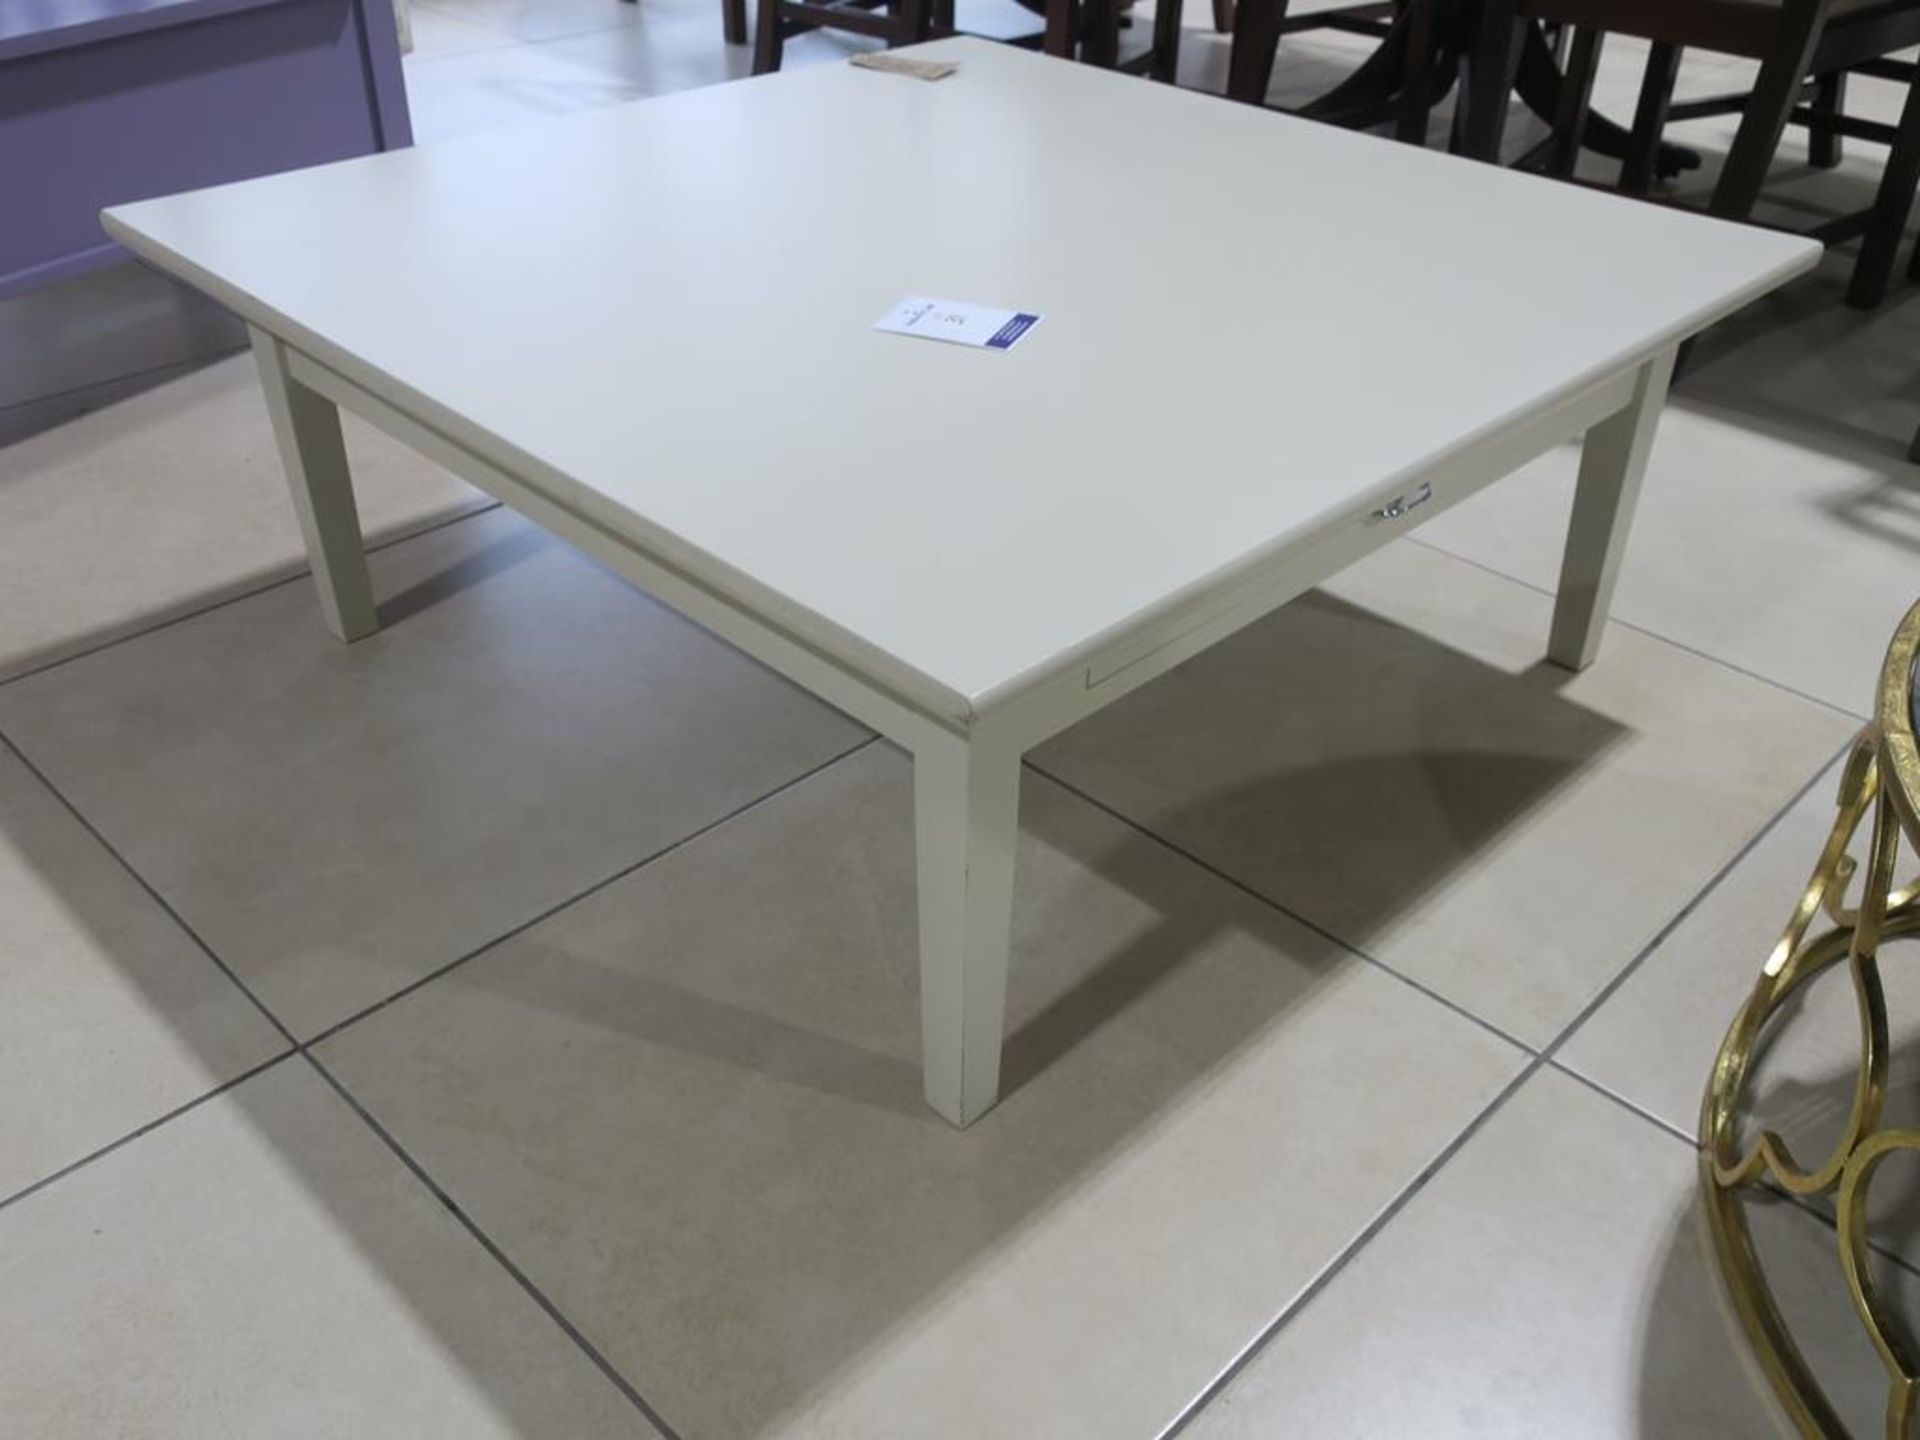 * A Voyage Large Square Coffee Table (H 41cm, W 100cm, D 100cm) (RRP £345) - Image 2 of 3